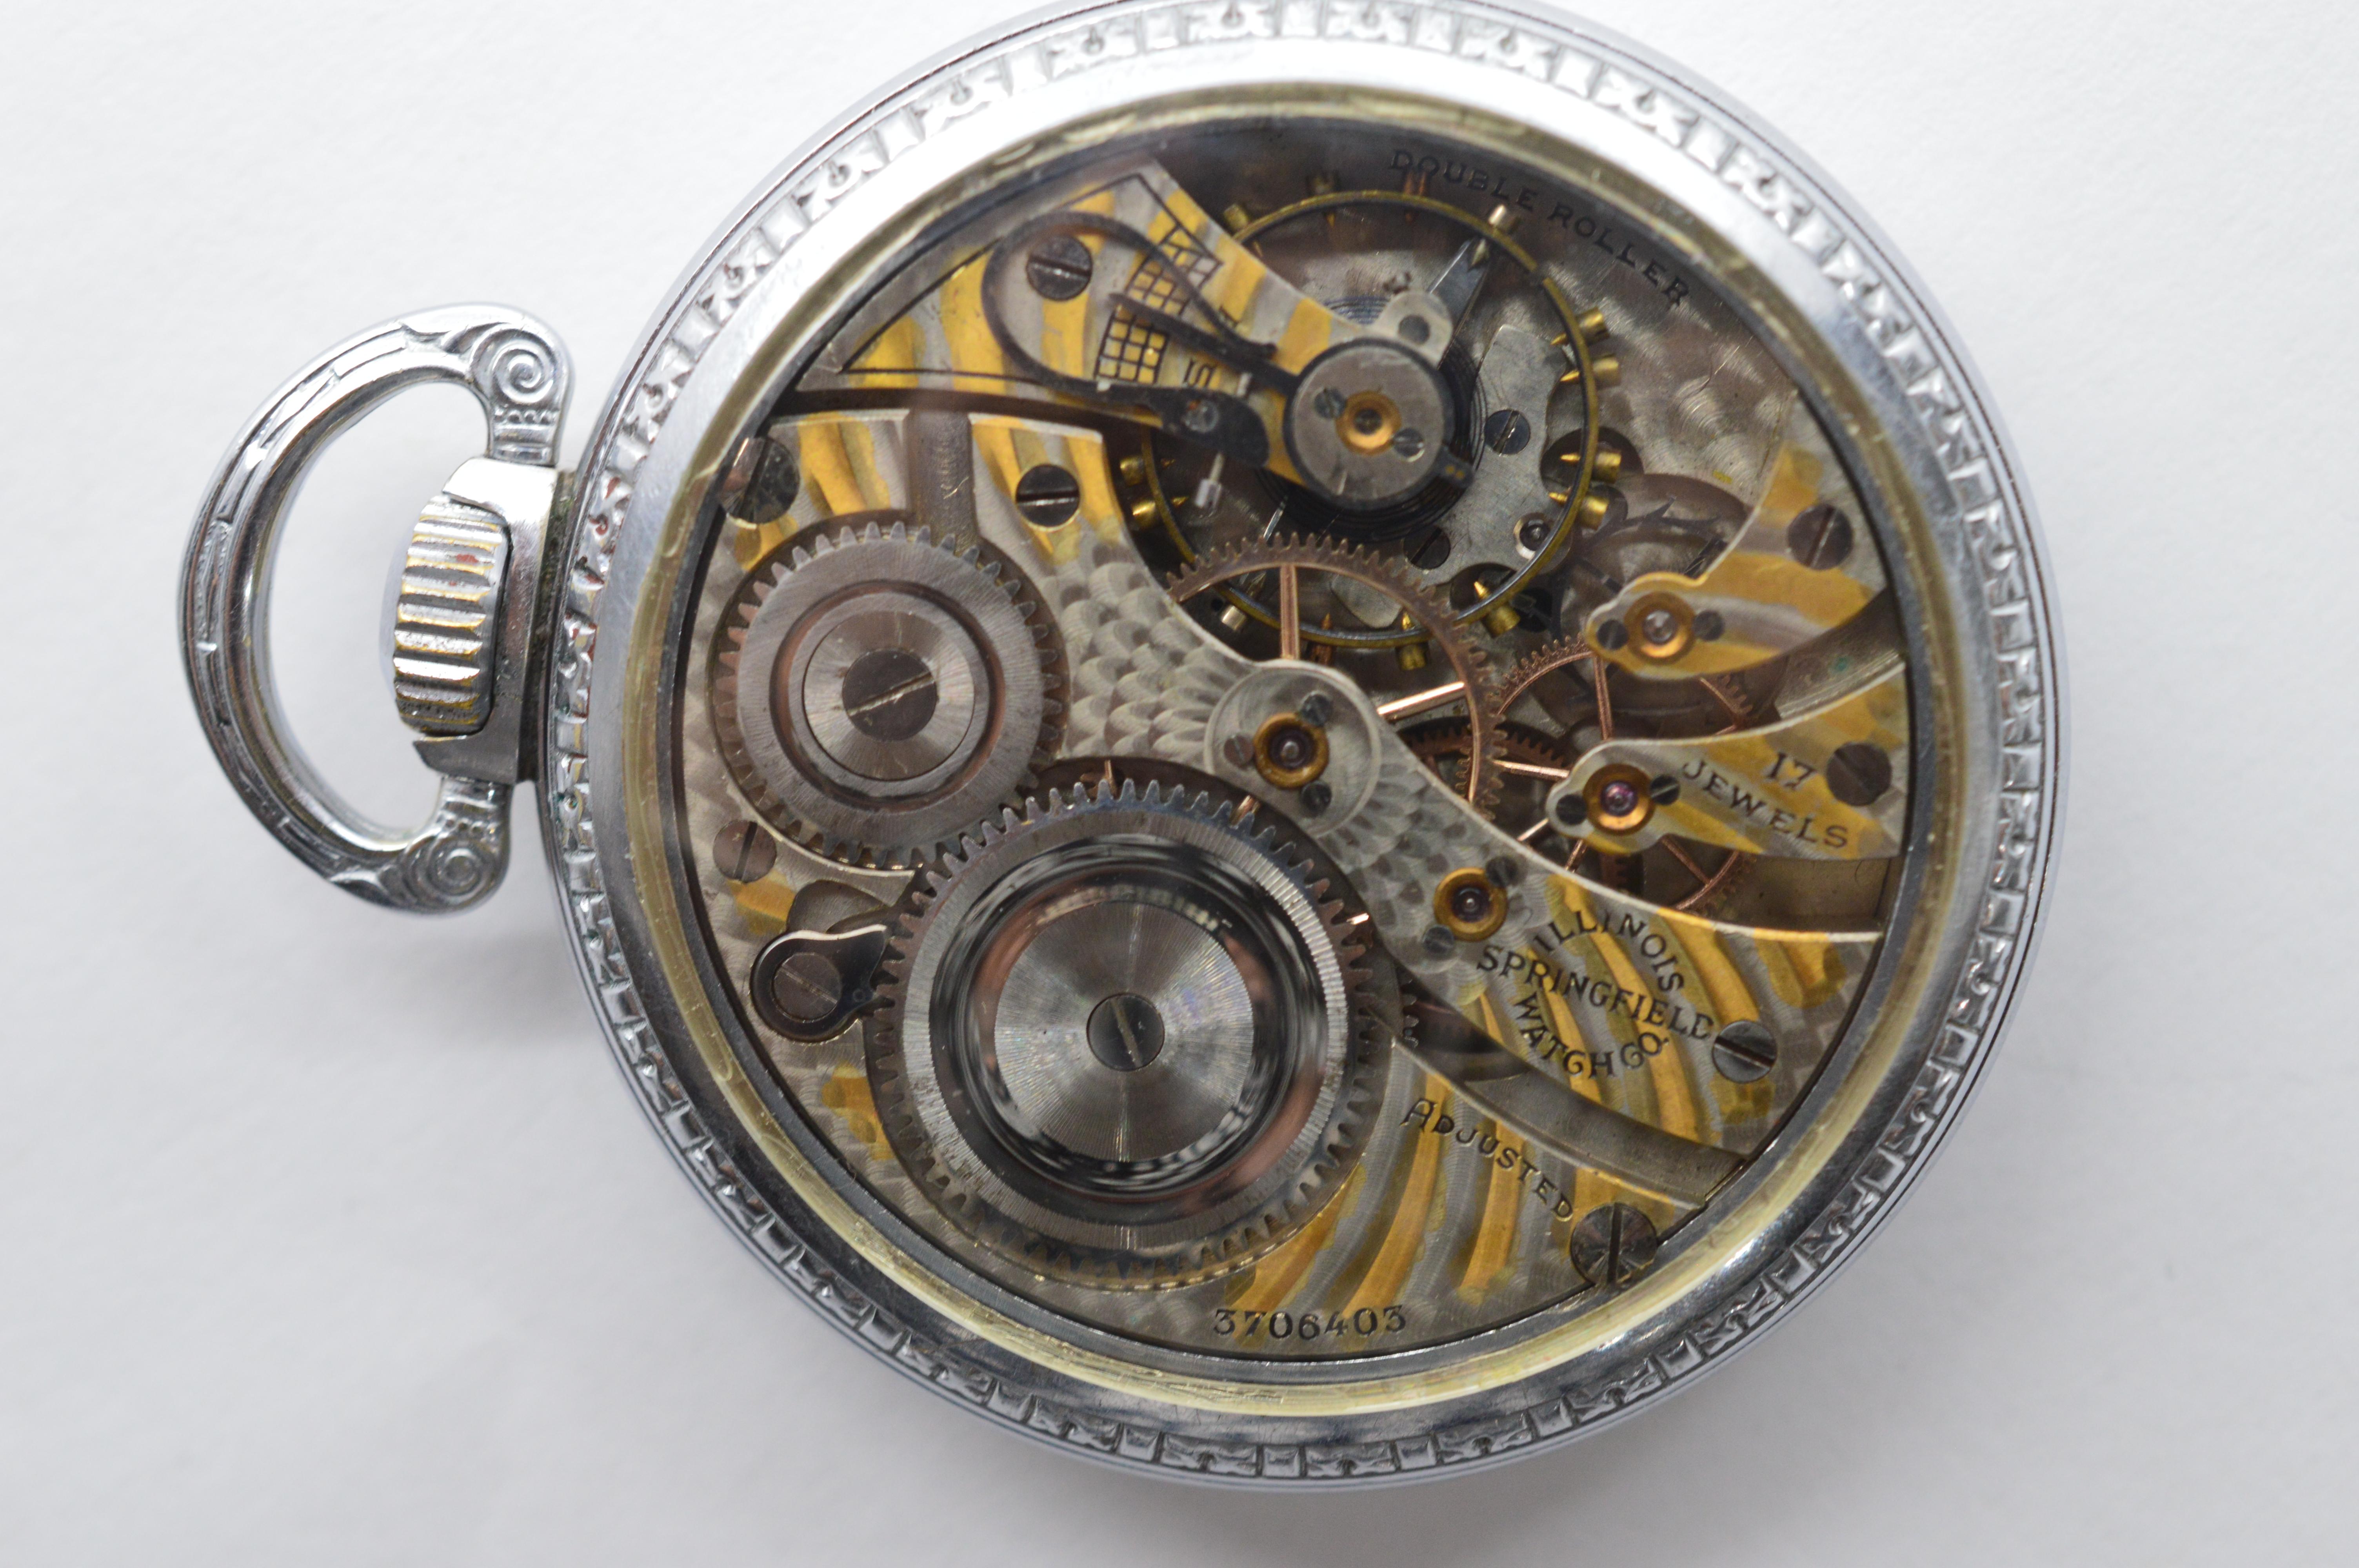 Enjoy seeing the craftsmanship in this Illinois 305 Steel Pocket Watch expertly restored with a unique display back allowing the intricate parts of this time piece to be viewed. Number 3706403, circa 1920. Measures 51 millimeters. Seventeen jeweled